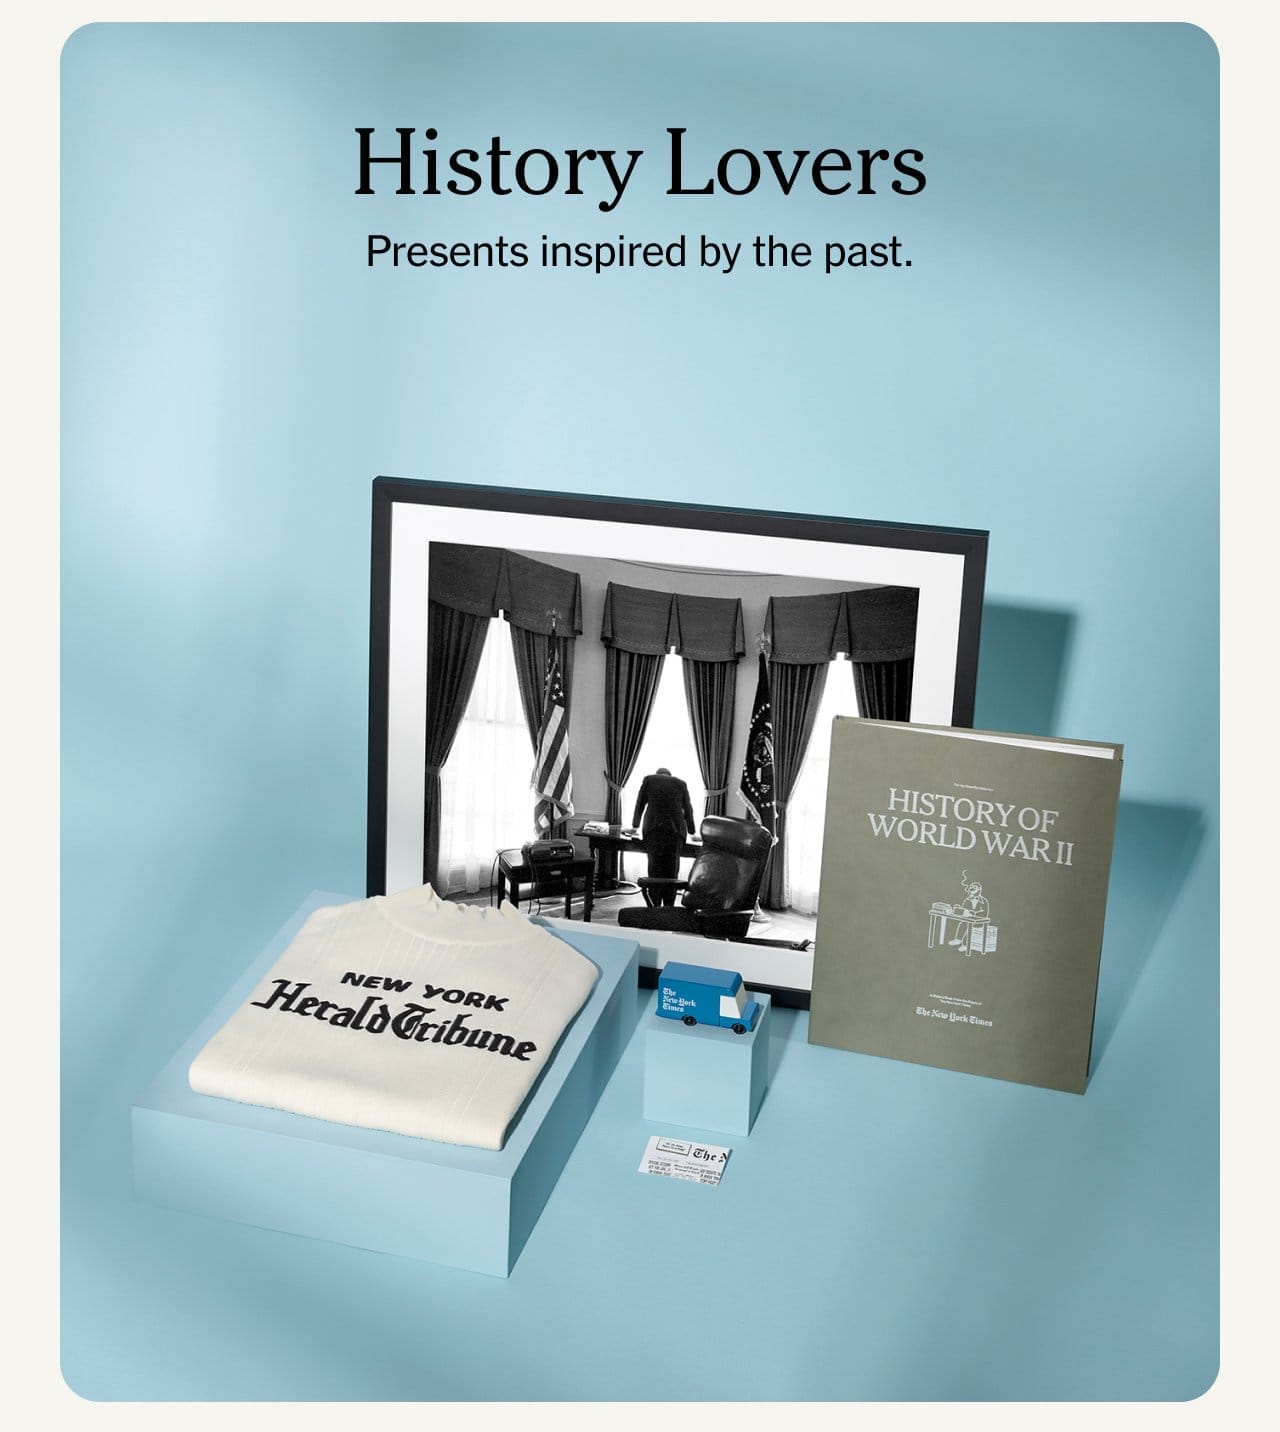 History Lovers. Presents inspired by the past.